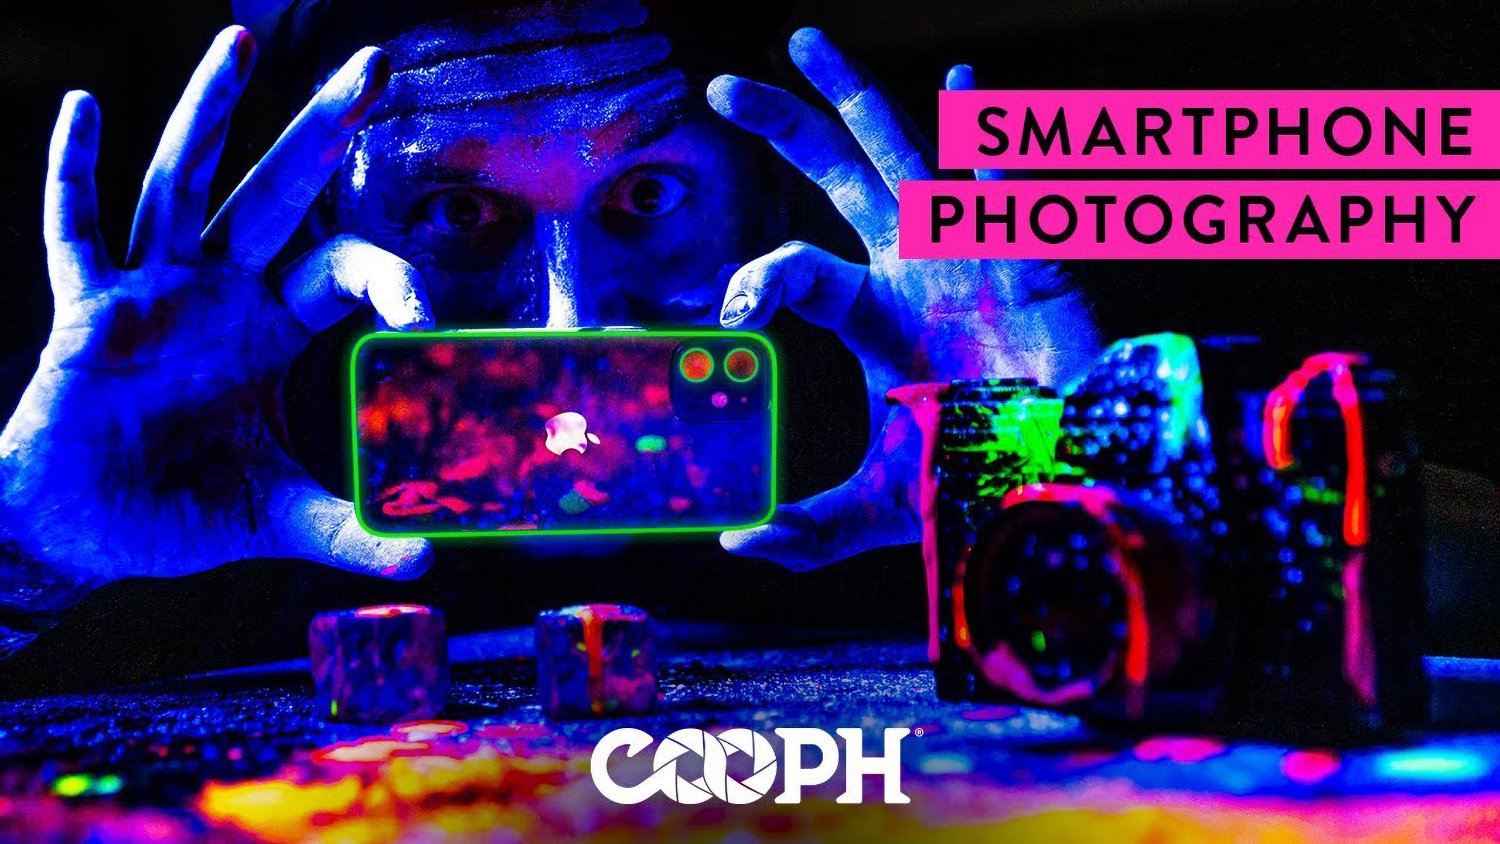 5 Smartphone Photography Tricks to Help You Capture Head-Turning Images - Digital Photo